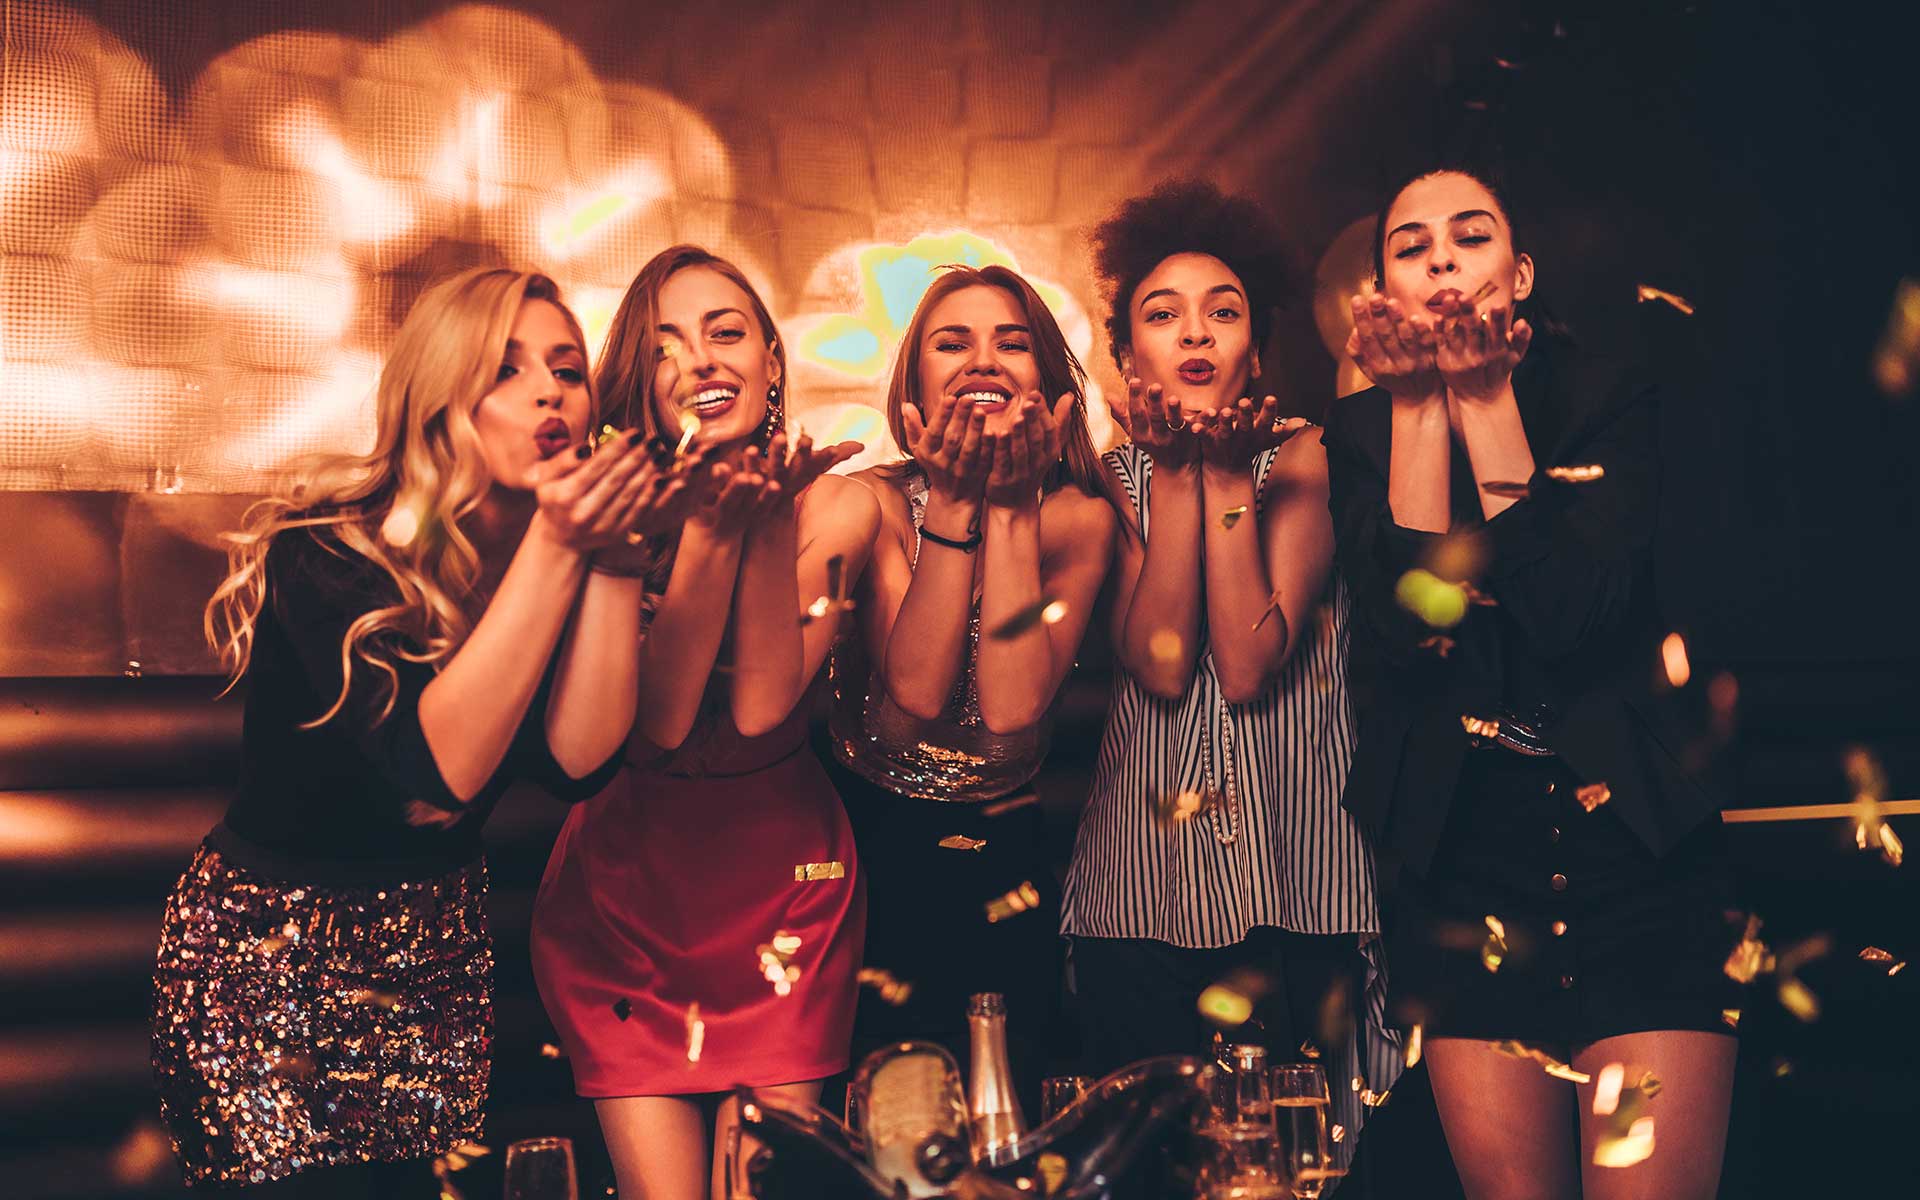 Group of girls blowing kisses in club